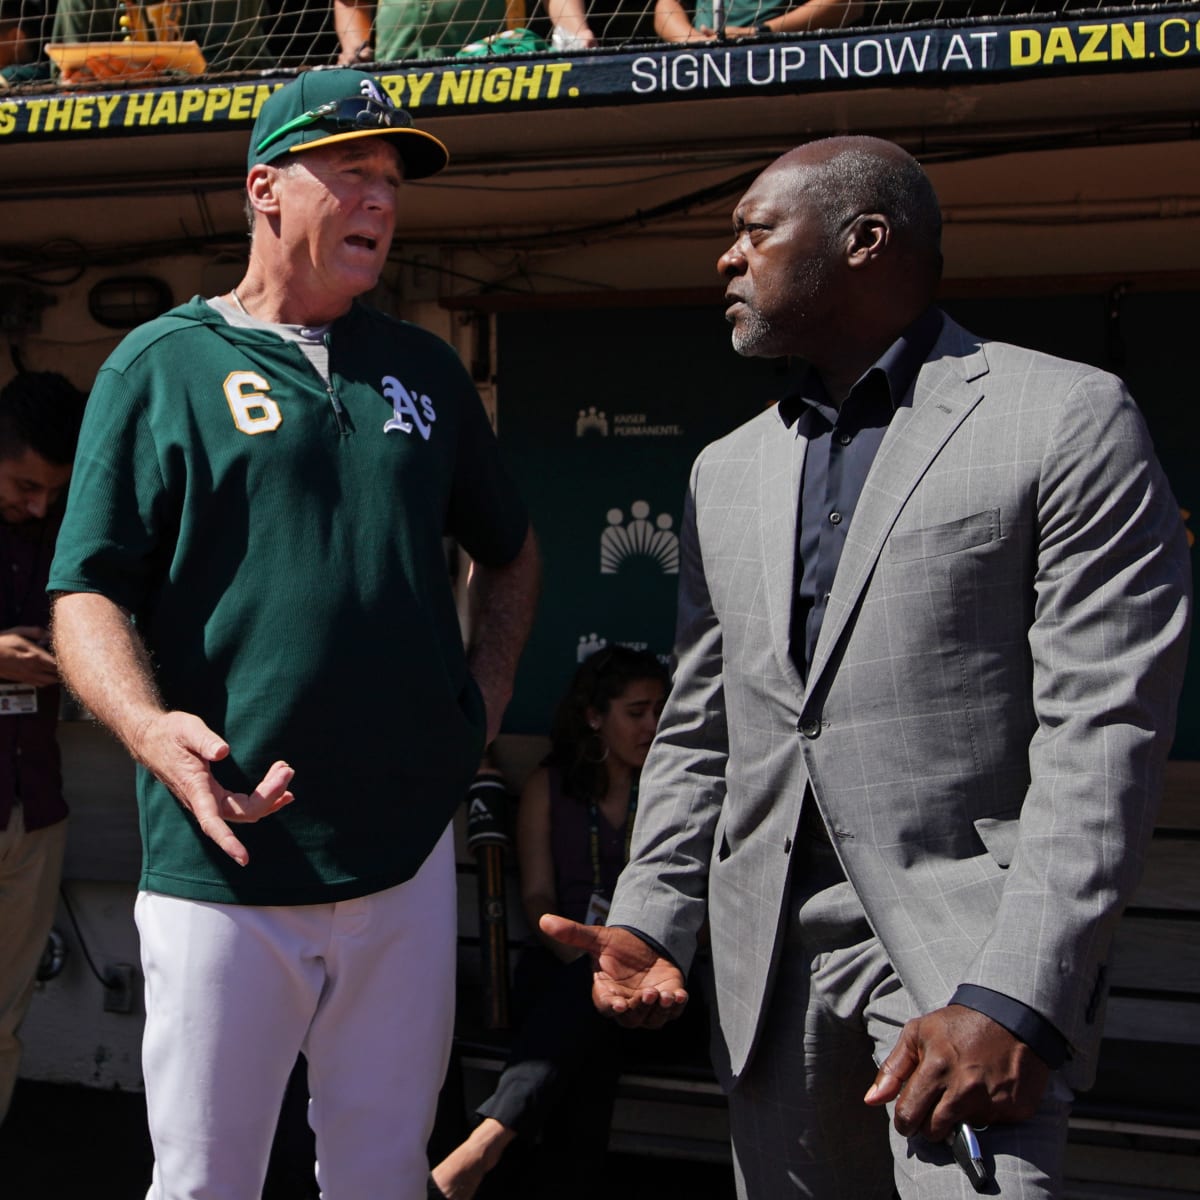 Former Athletics Star Dave Stewart Reports He Doesn't Have